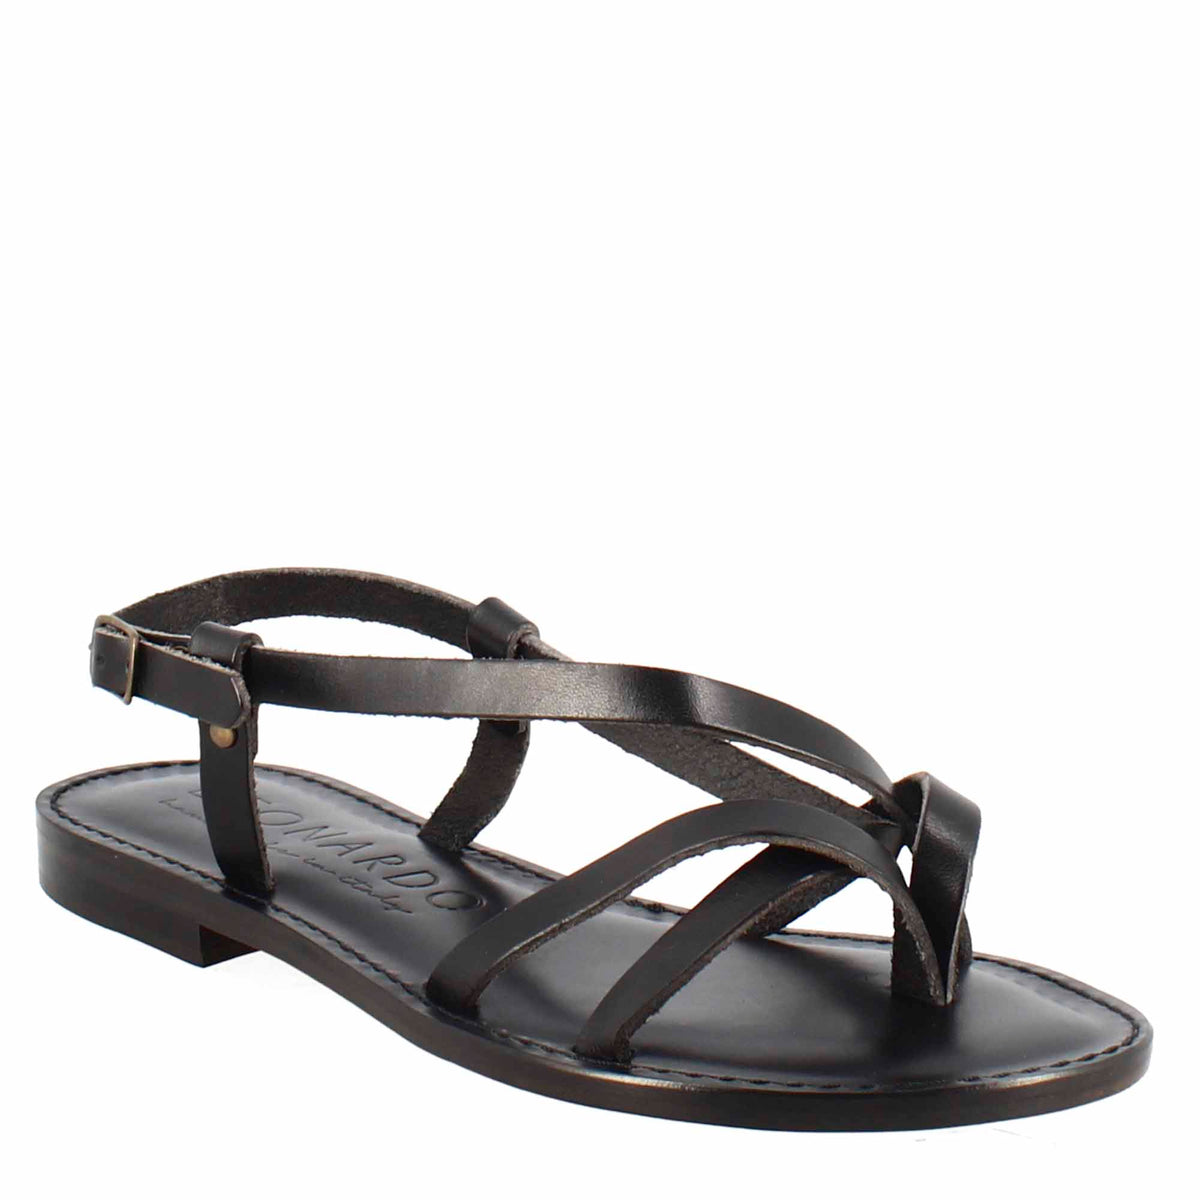 Silver Thong Sandals for Women, Genuine Leather Sandals, Summer Party  Sandals Handmade in Greece. -  Canada